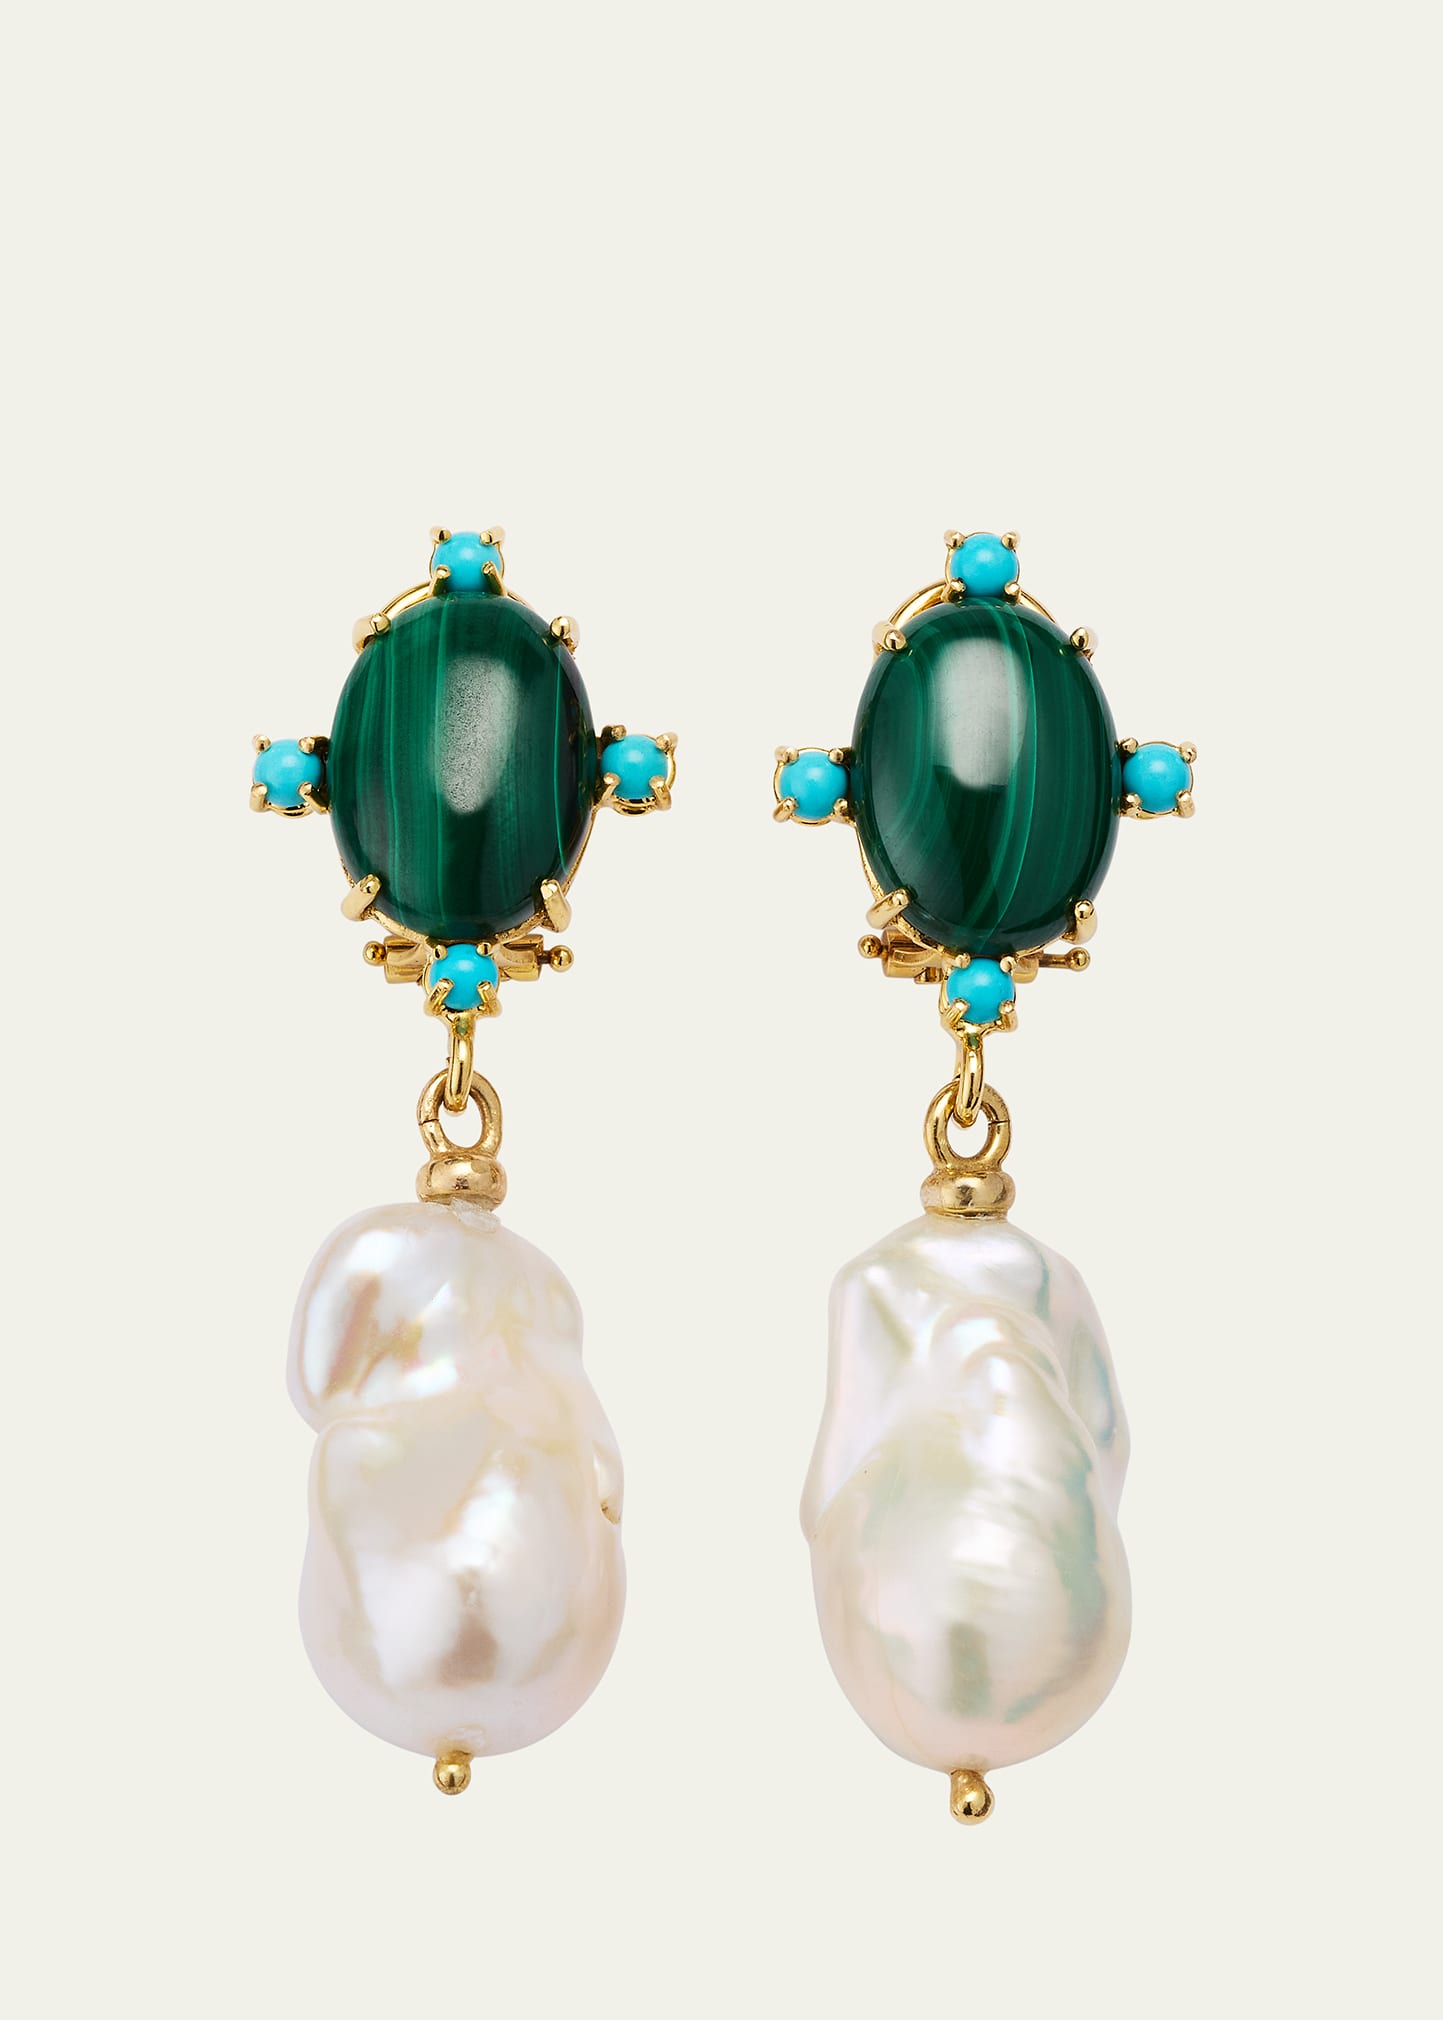 Stone and Pearl Earrings with Malachite and Turquoise Colored Resin